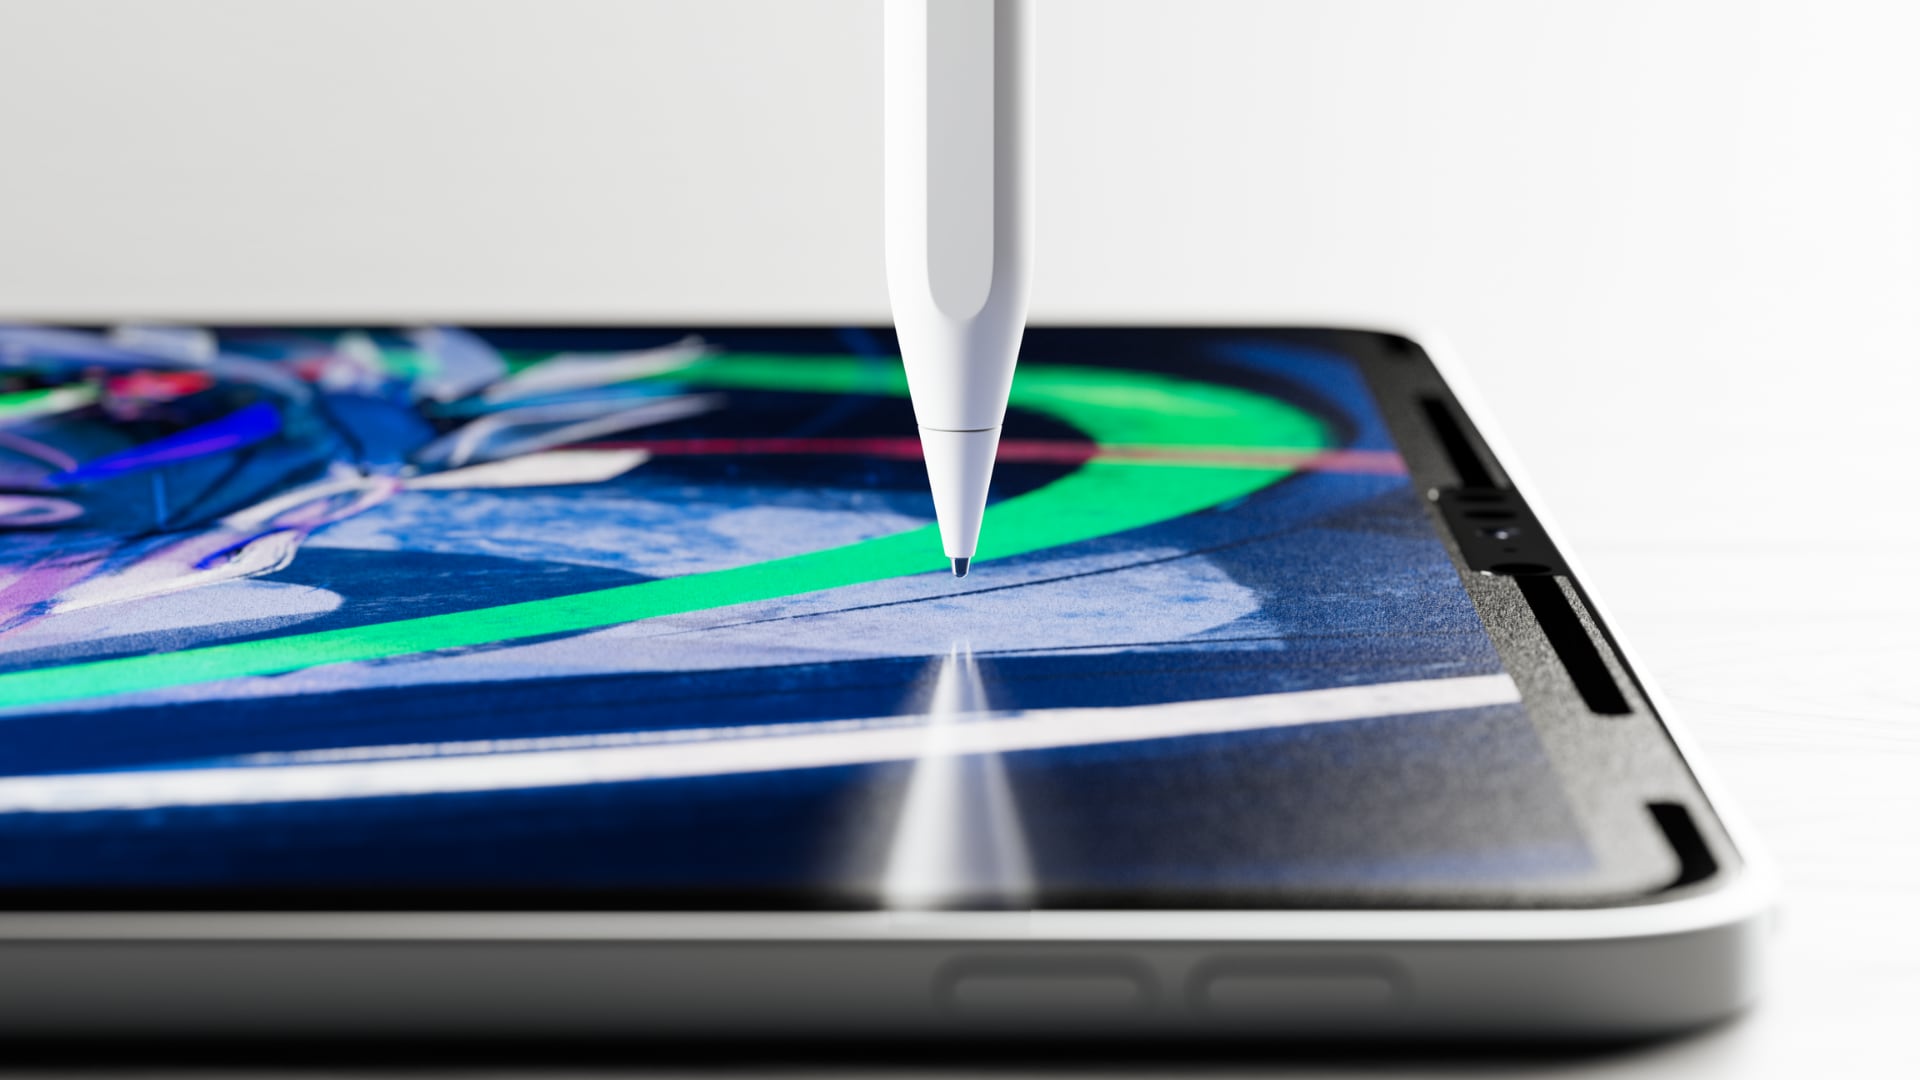 Astropad’s Paper-Like Screen Protector and Apple Pencil Tip Works With M4 iPad Pro